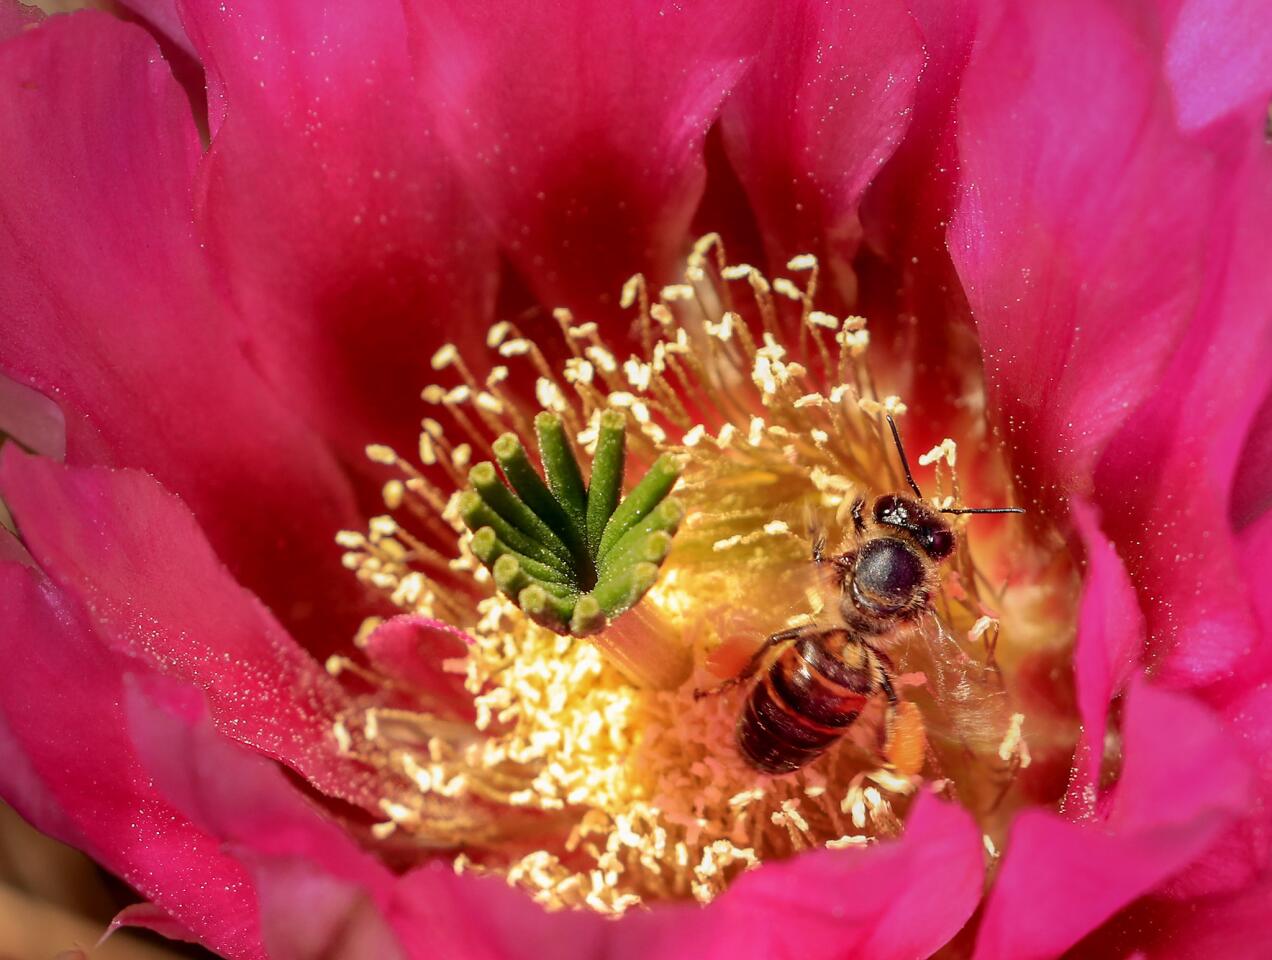 Things are buzzing in Joshua Tree National Park, including a bee that is enjoying a little time in the flower of a hedgehog cactus.